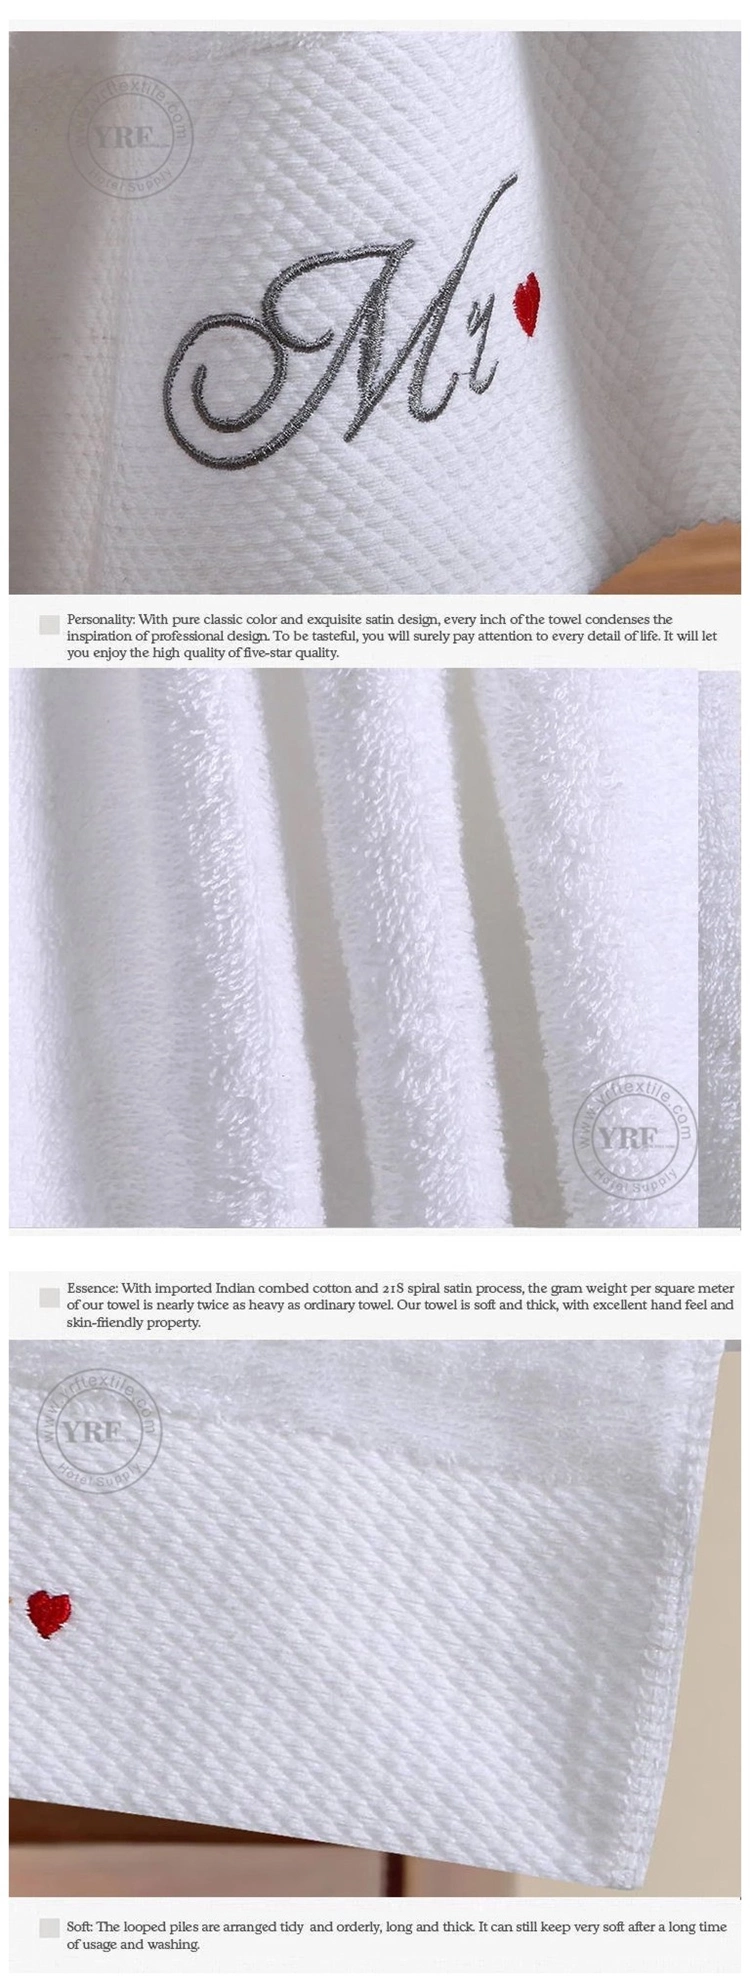 Made in China 100% Cotton Plain Color Terry Dobby Border Bath Towel